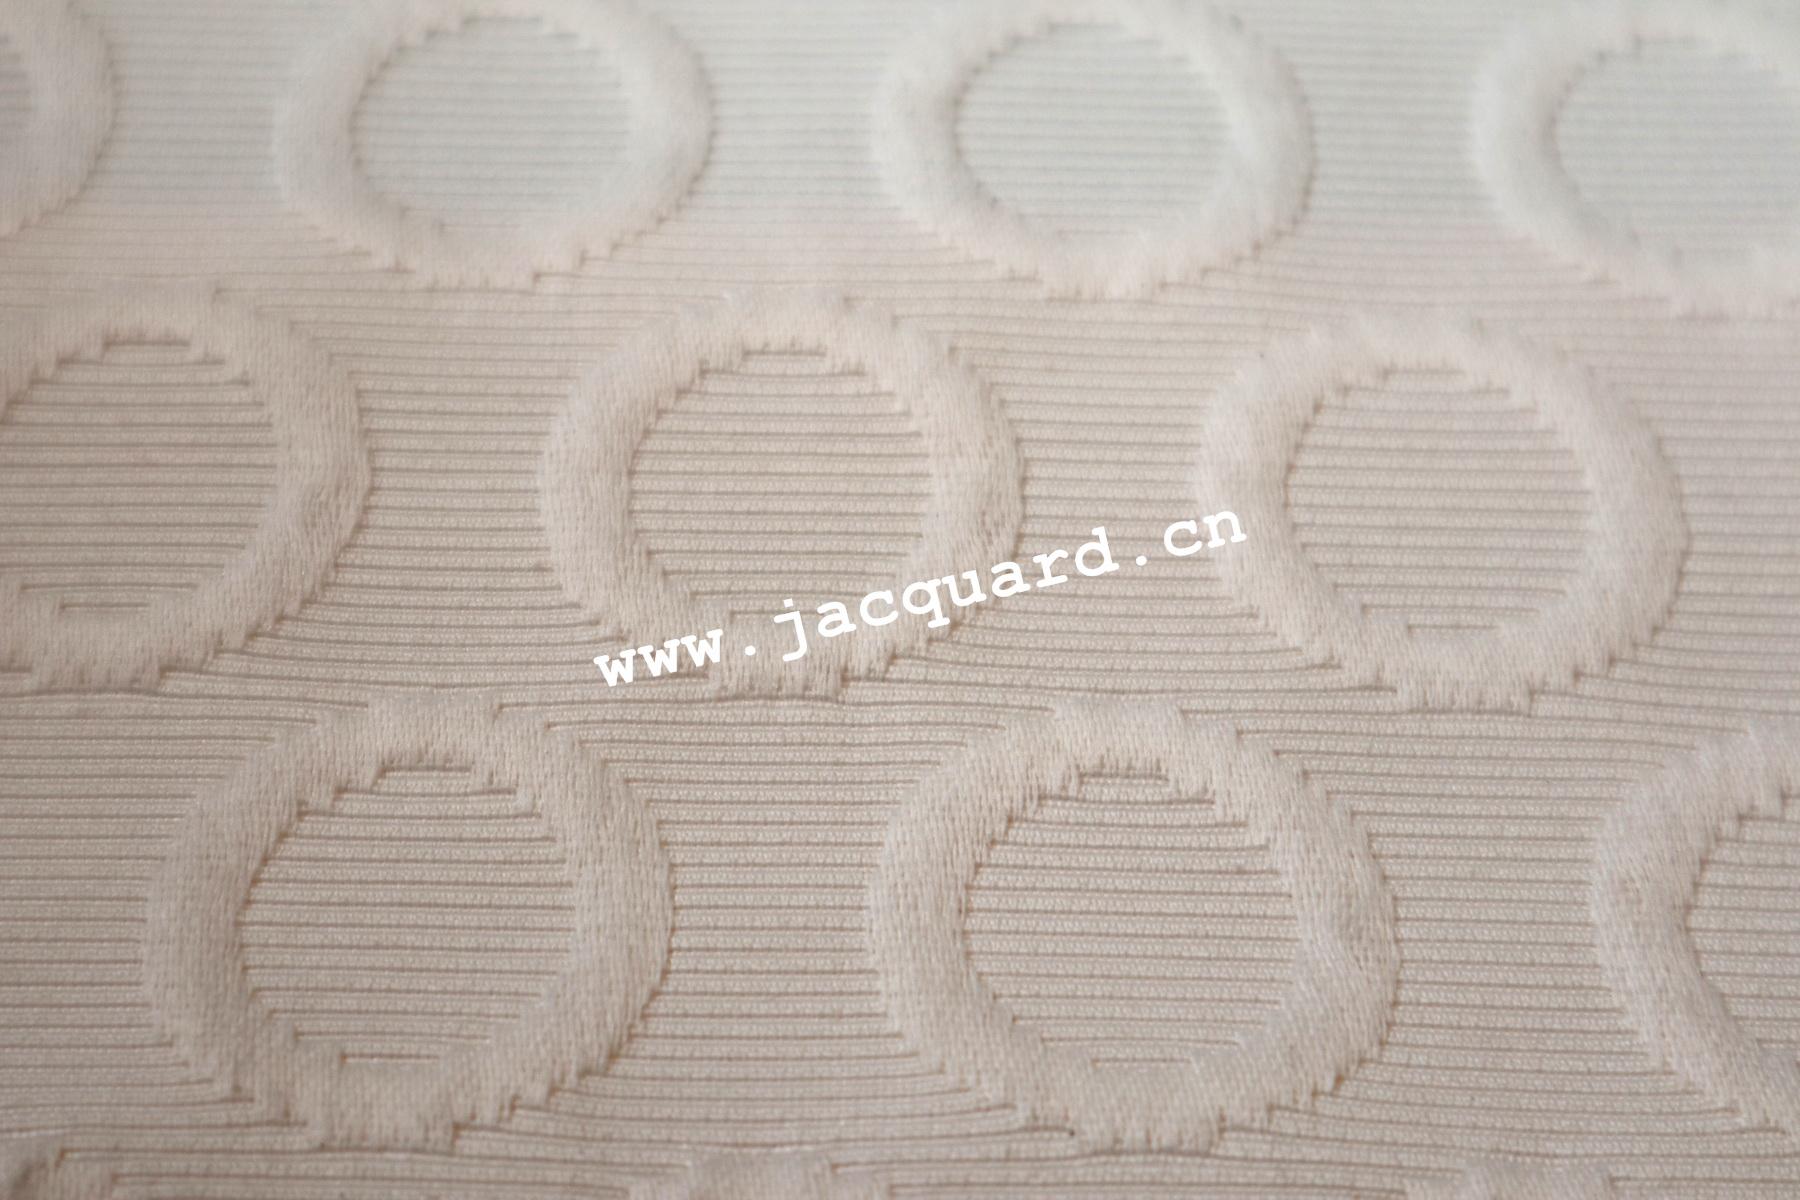 Jacquard Polyester Cotton Bed Cover Bed Spread Thickening Skidproof